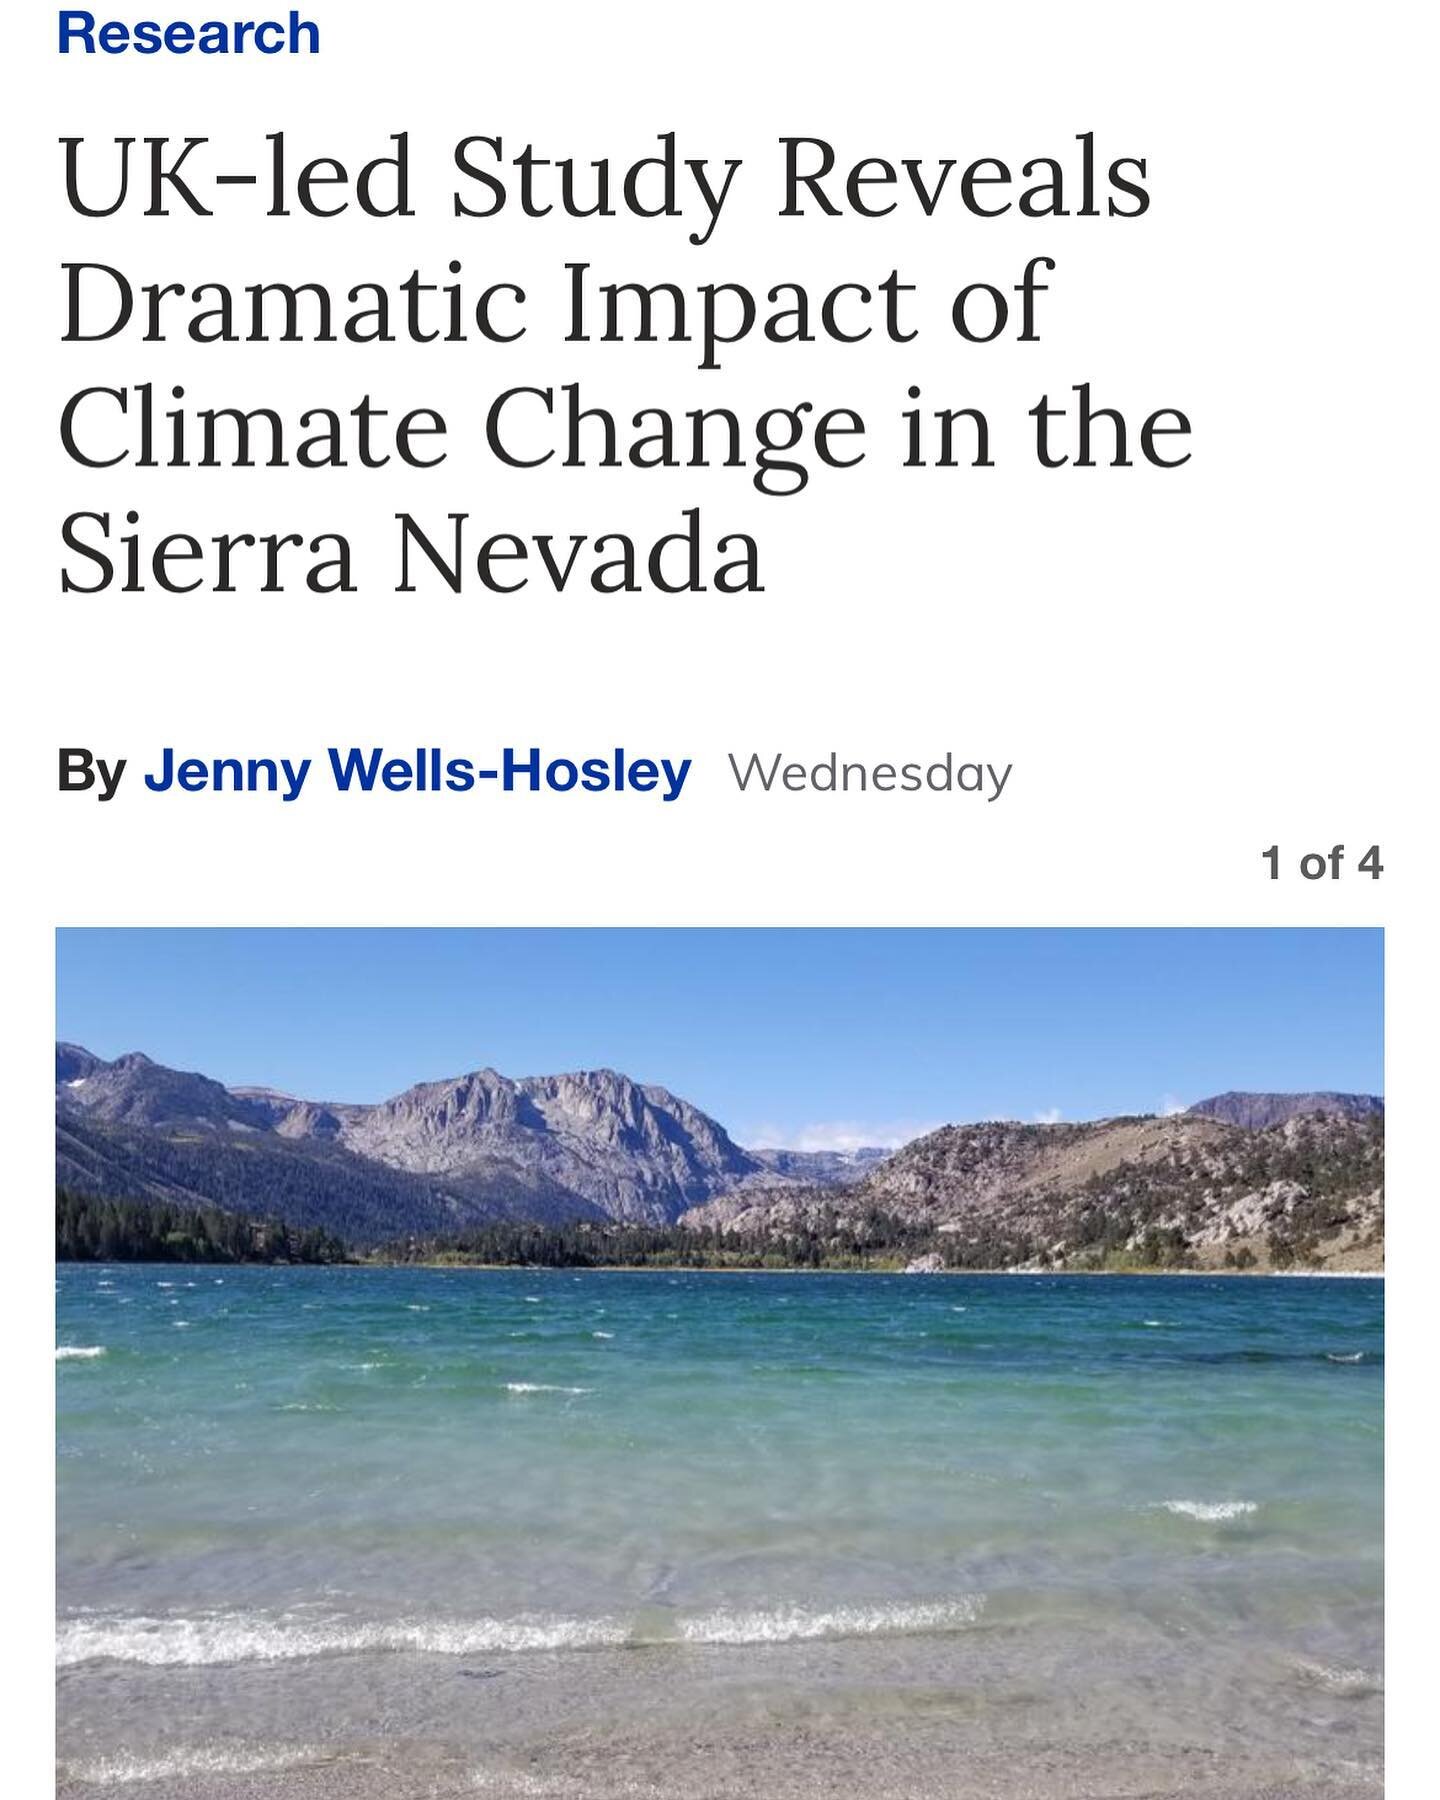 Check out this article highlighting some of our current work! Link in bio 

#research #climatechange #sierranevada #climate #change #science #lab #laboratory